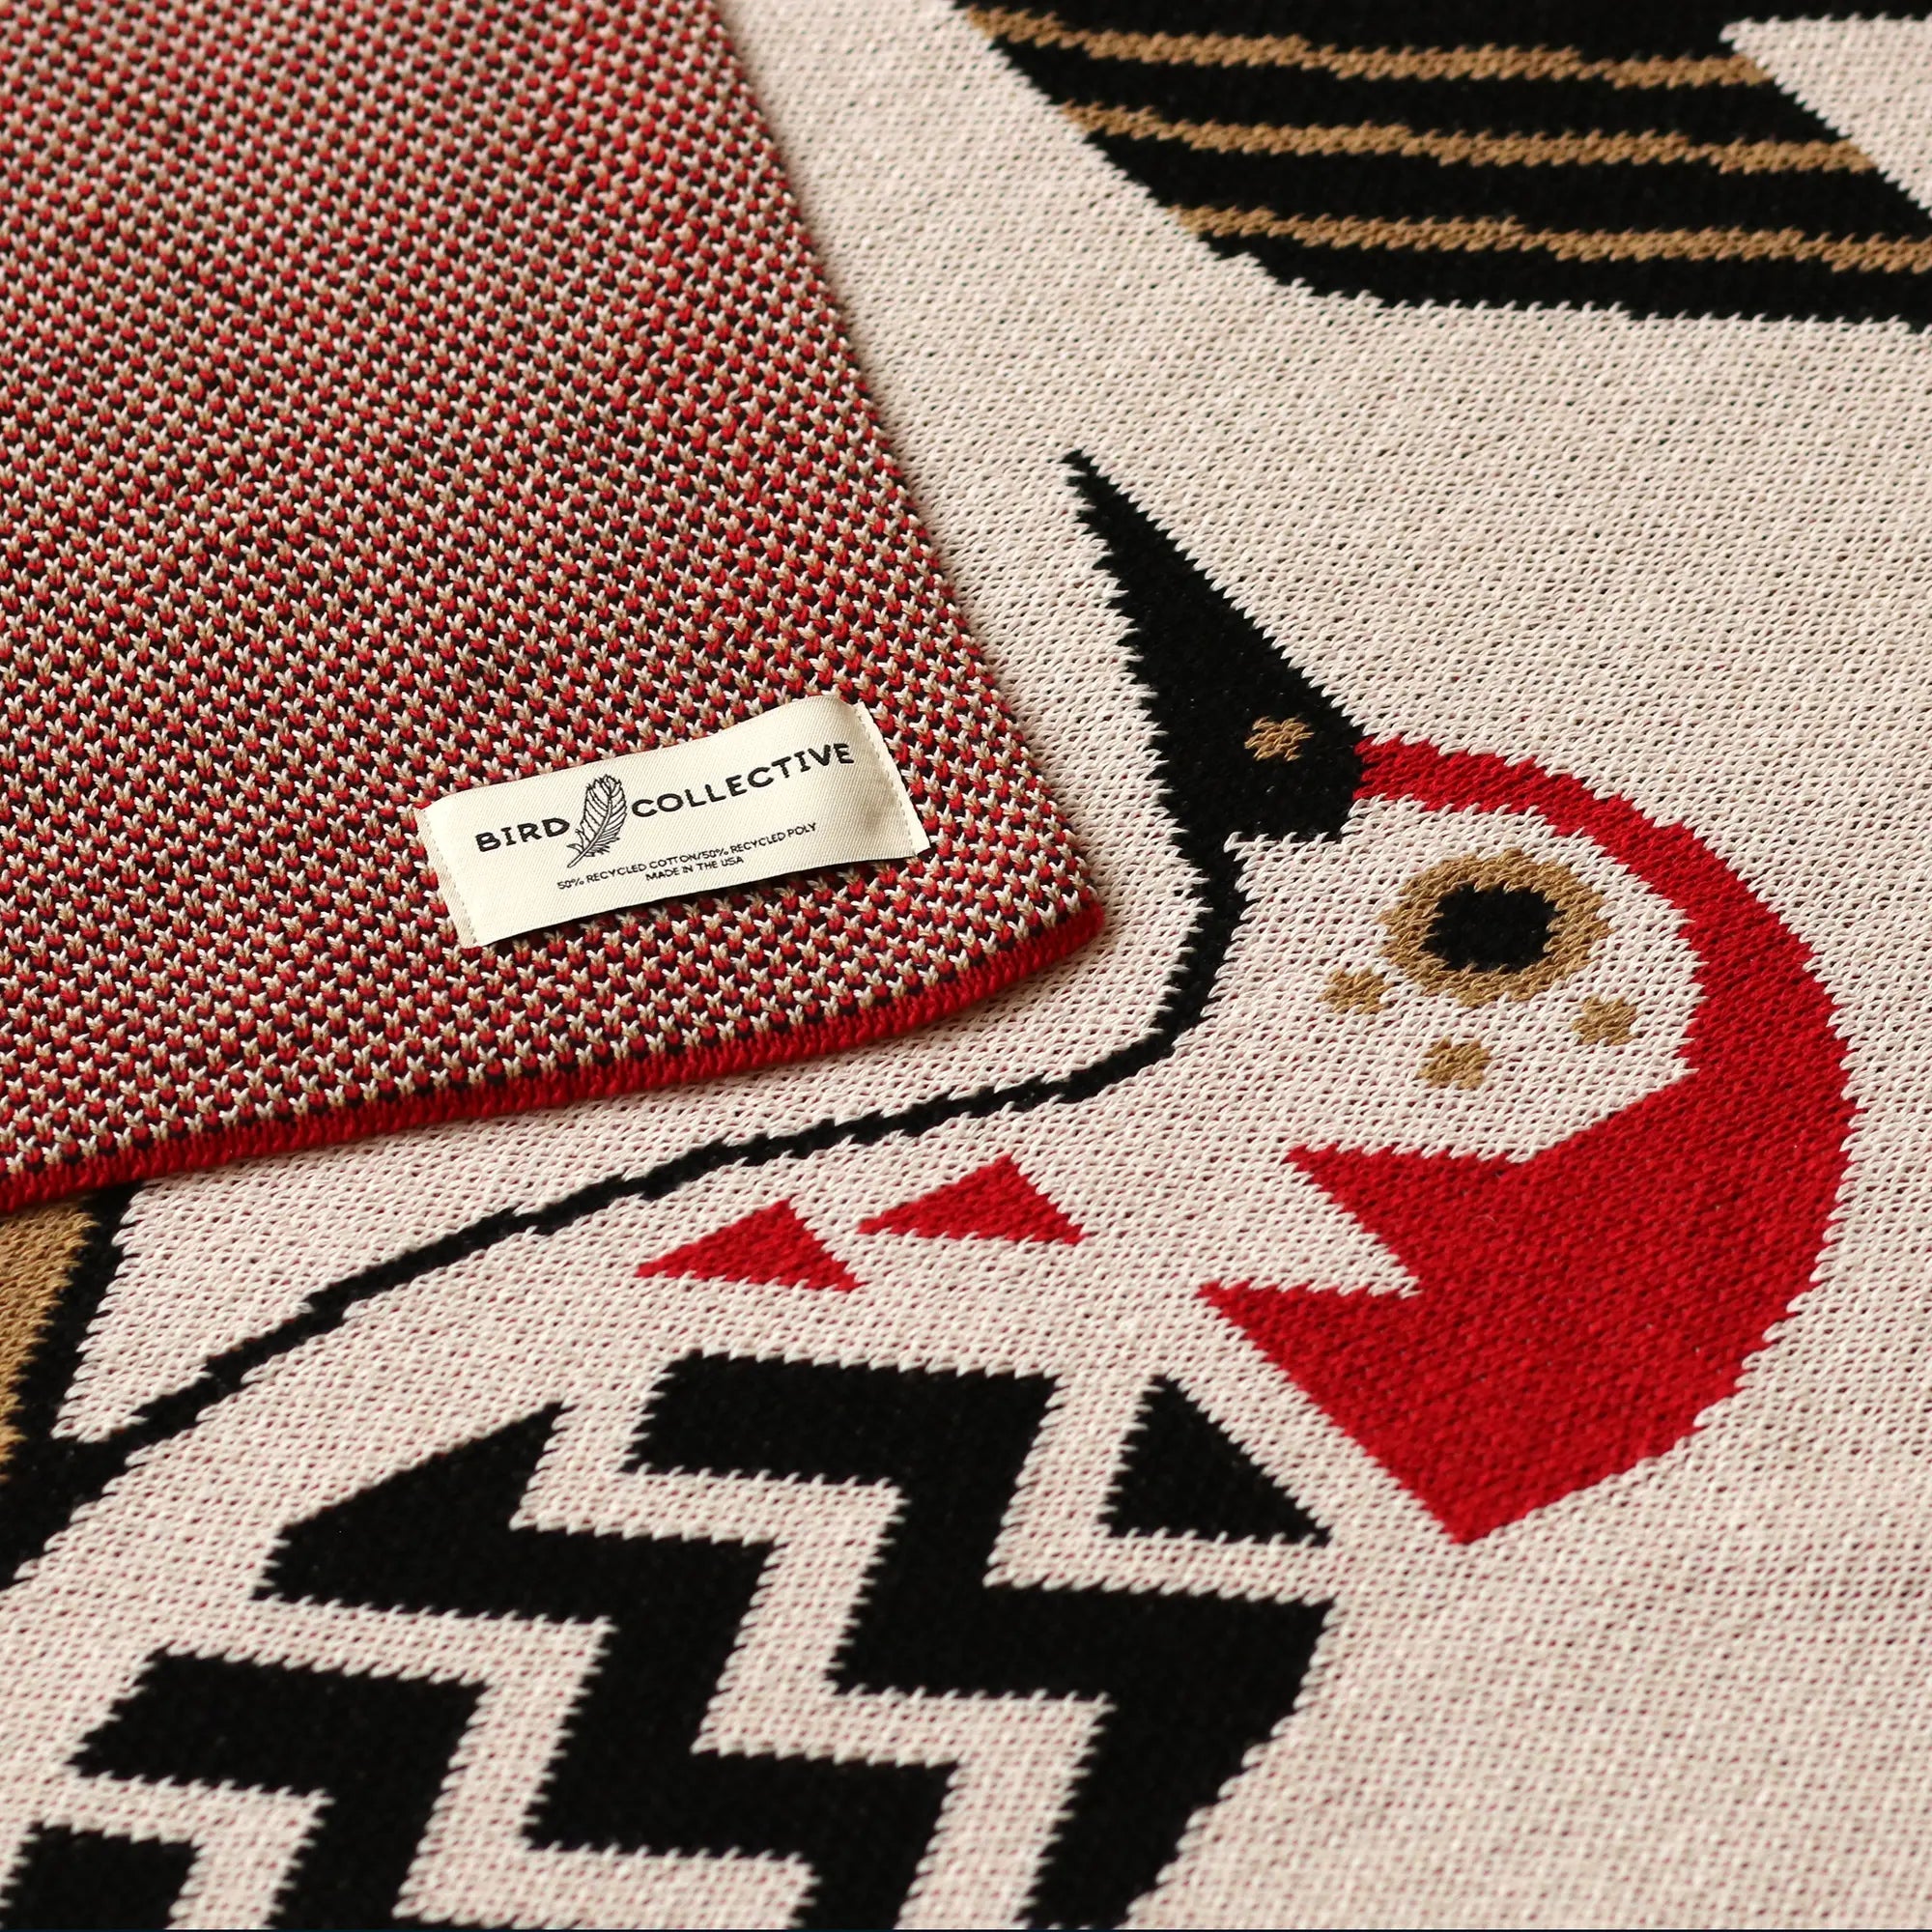 Woodpeckers of North America Knit Blanket - Bird Collective